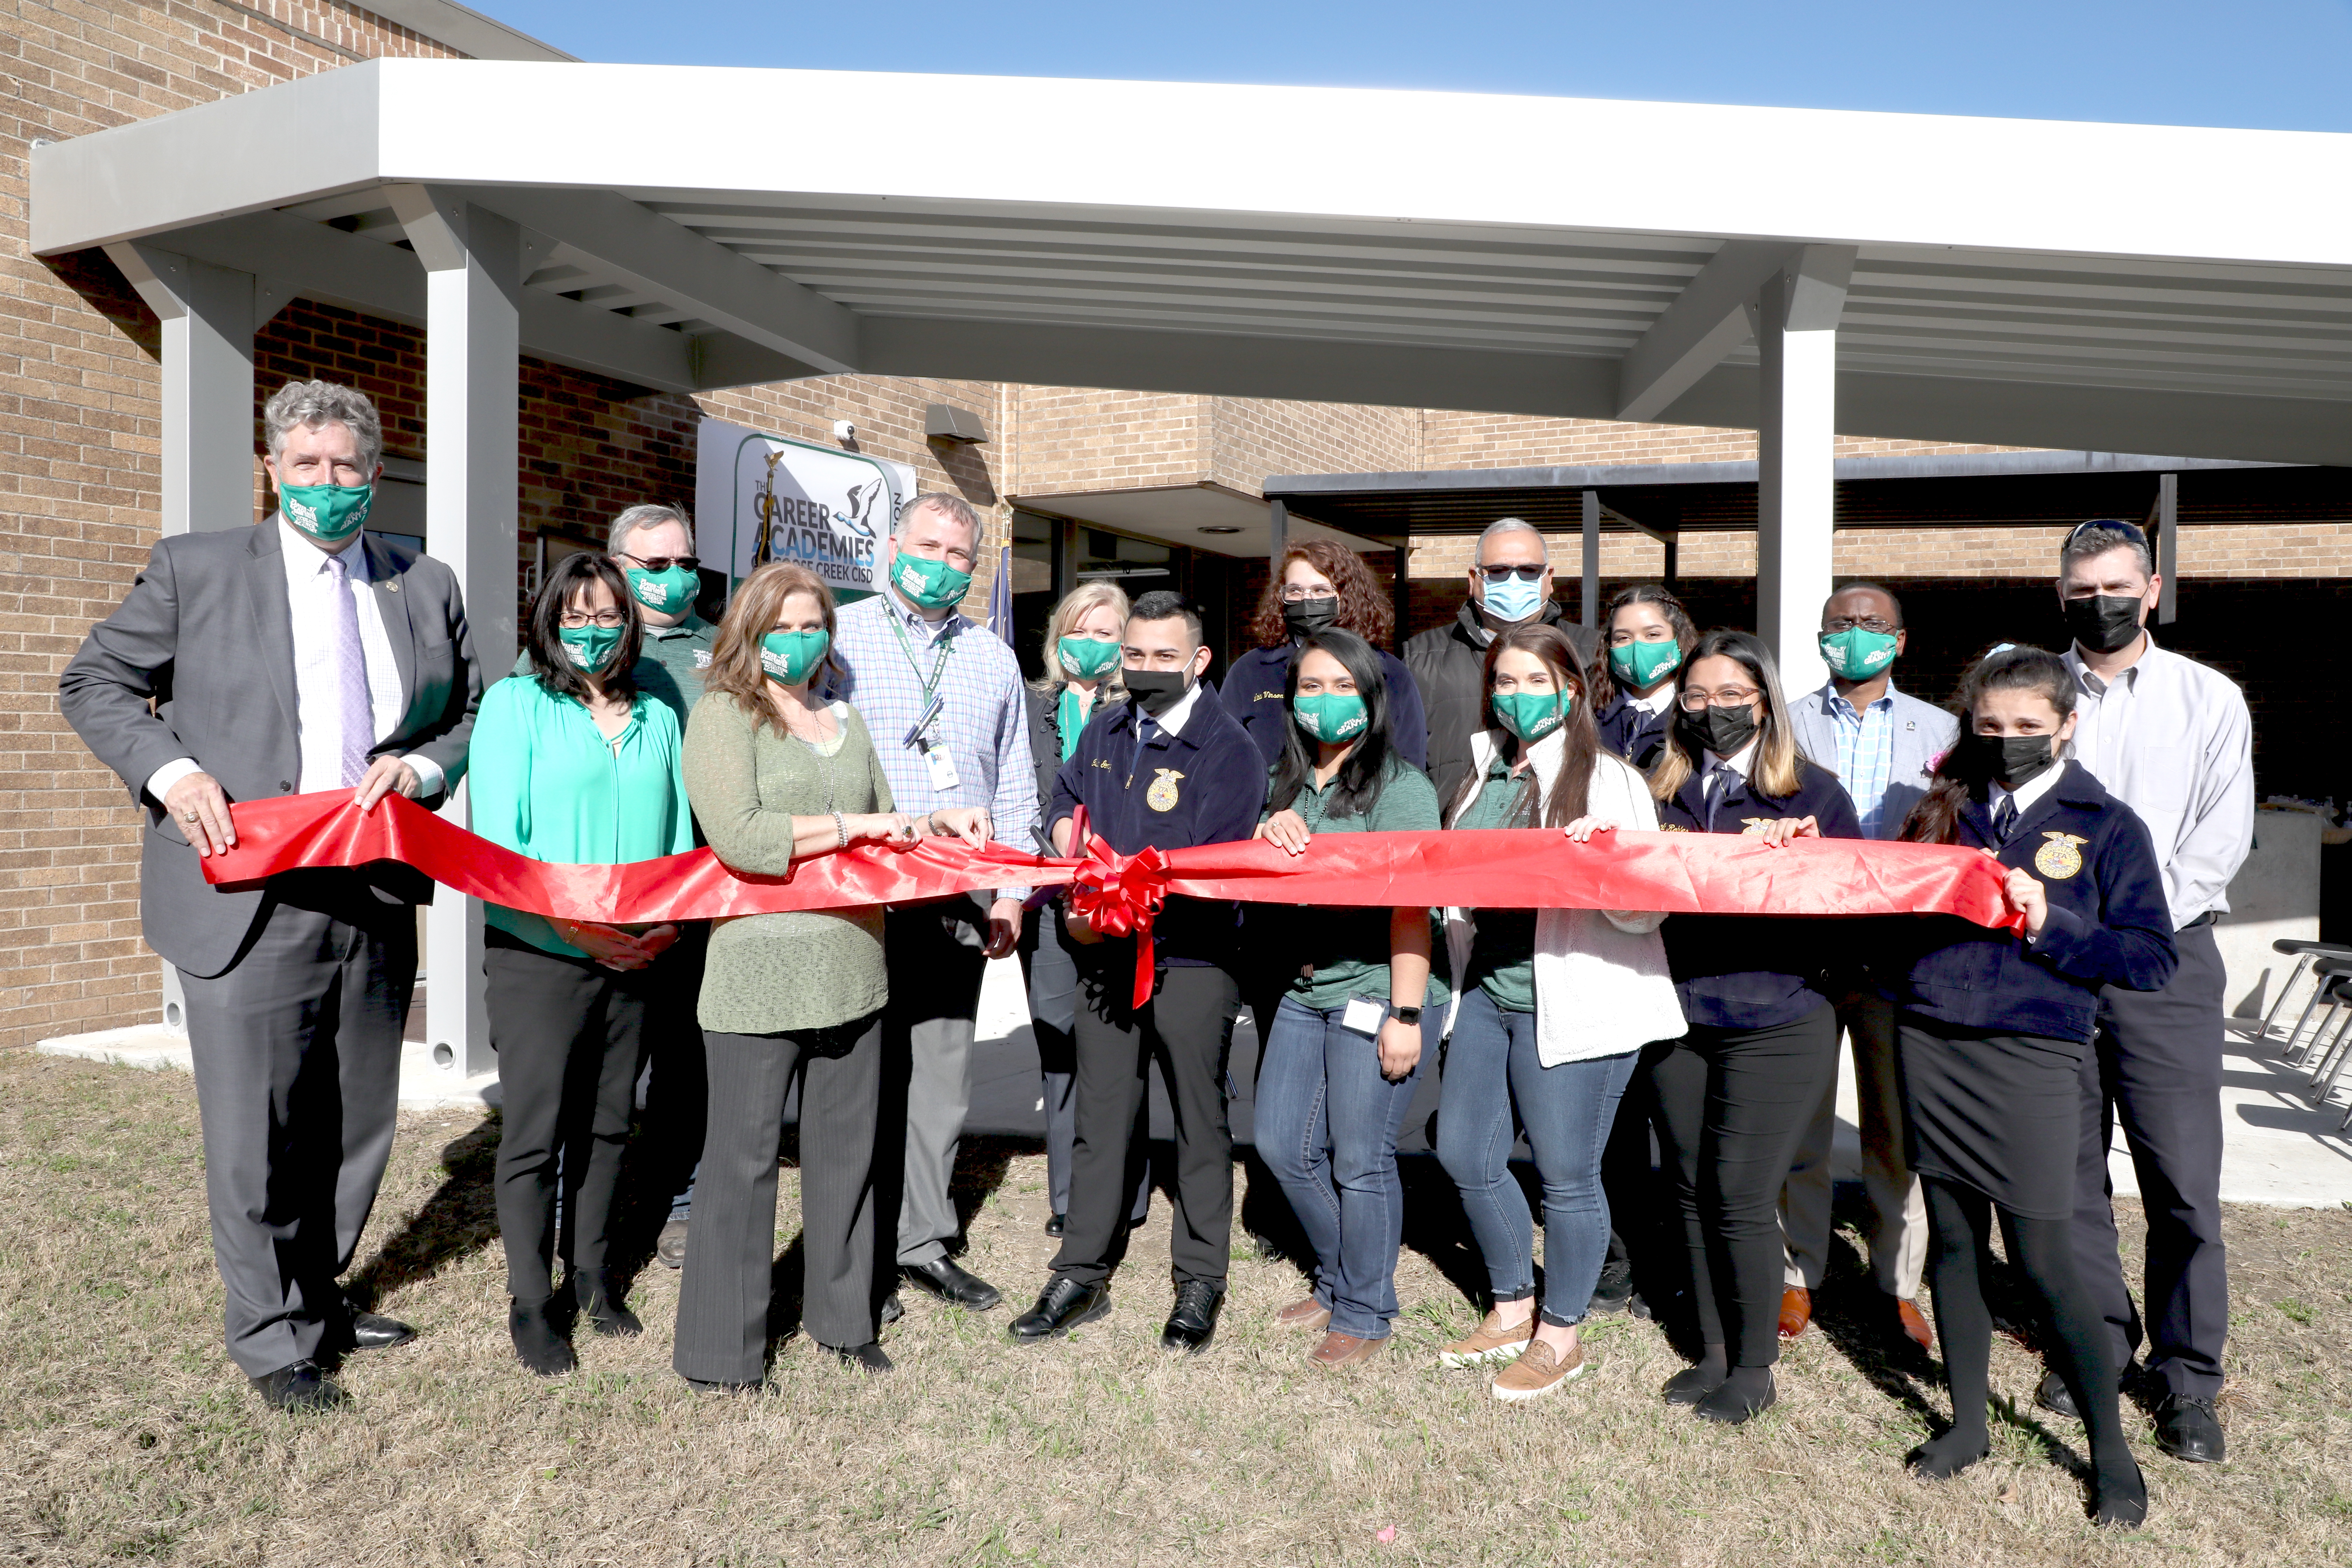 Staff, students and community members cut ribbon for new facility.